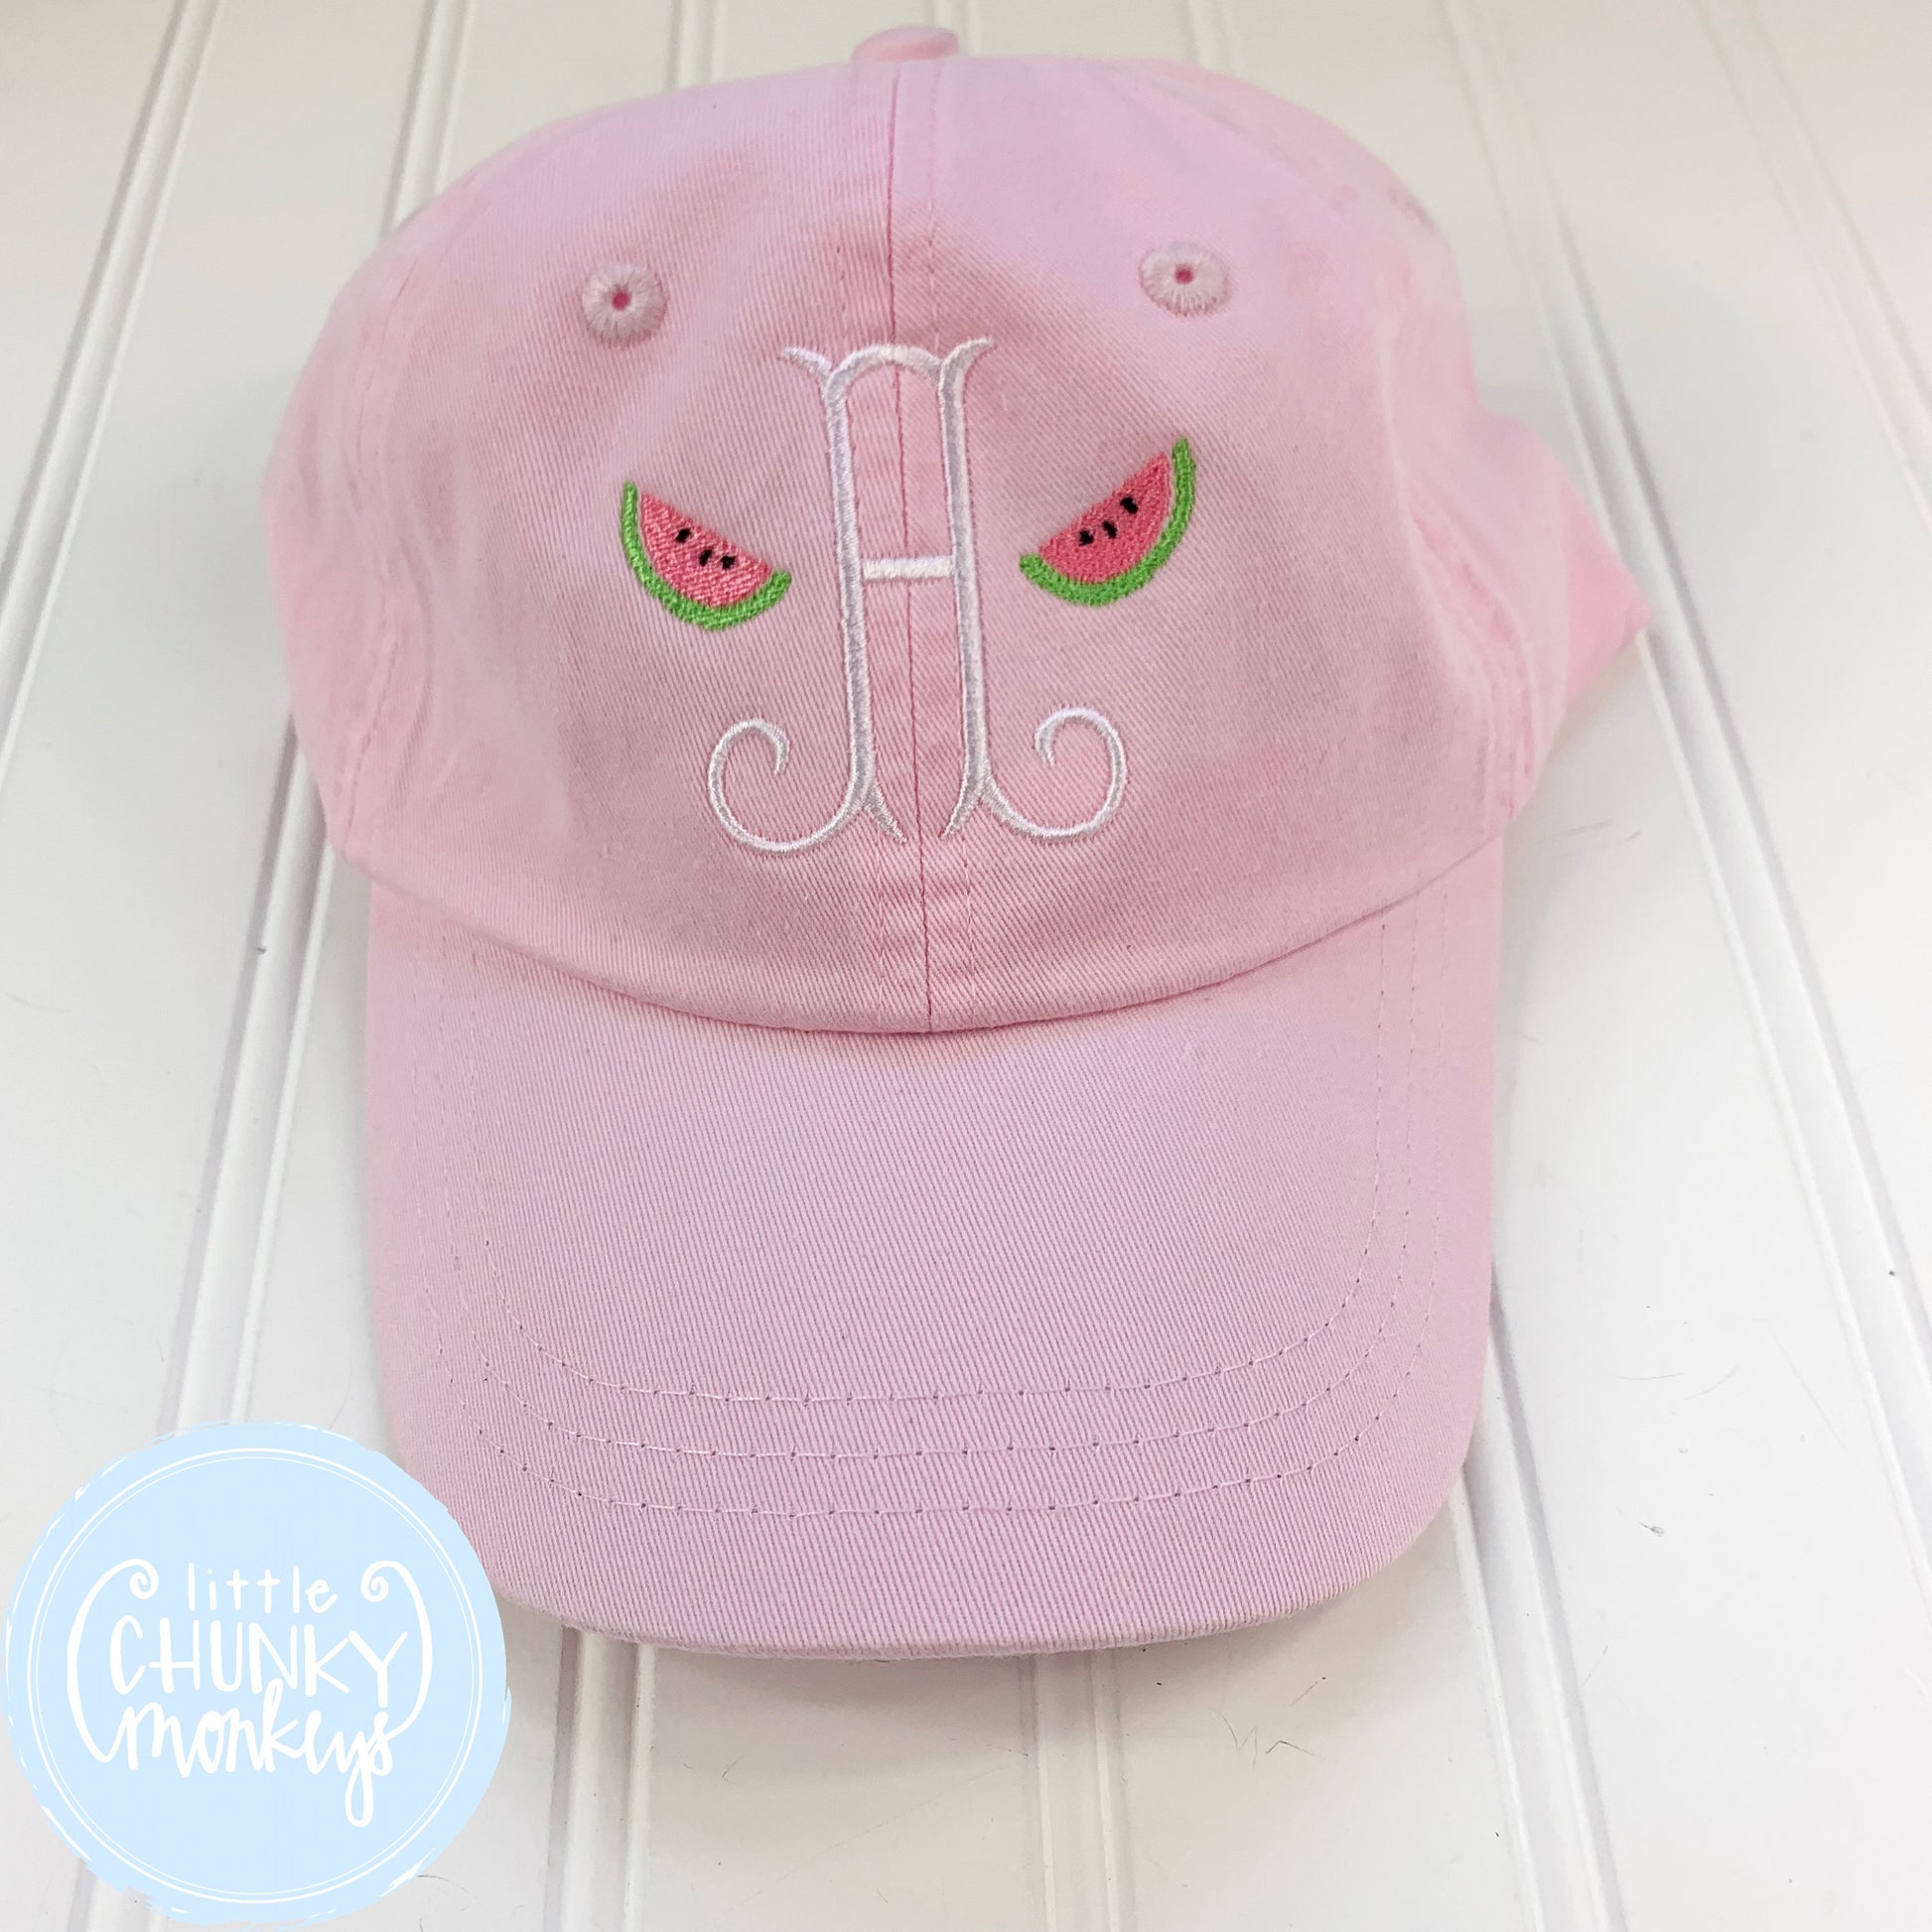 Toddler Kid Hat - Monogram with Watermelon Mini's on Pale Pink Hat